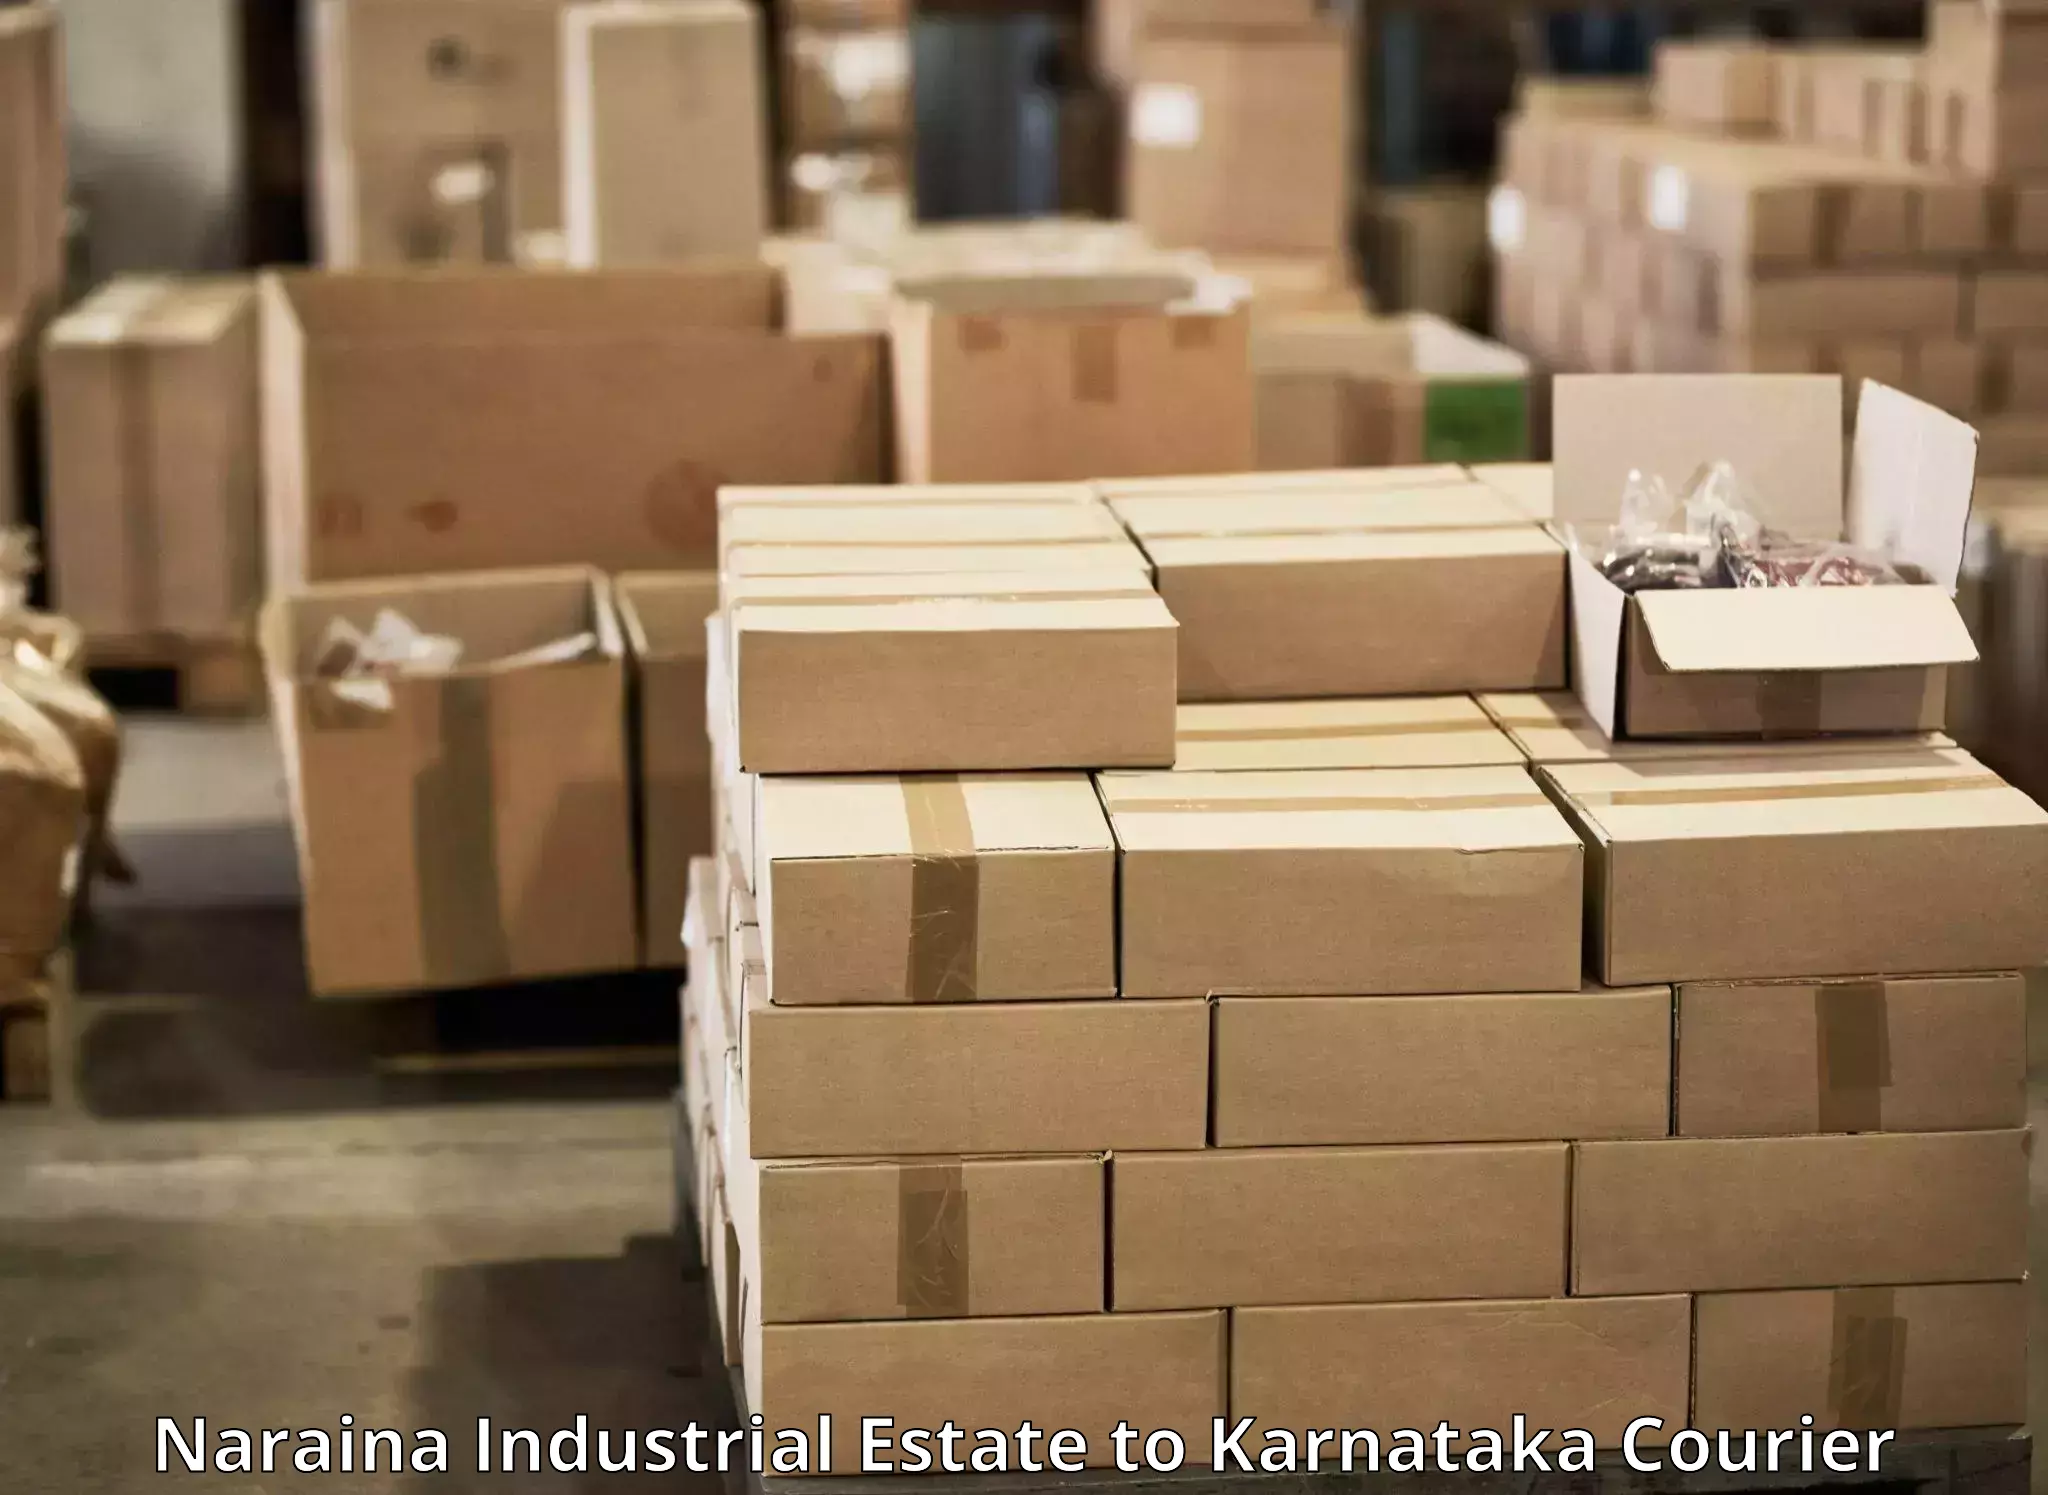 Speedy delivery service Naraina Industrial Estate to Chittapur